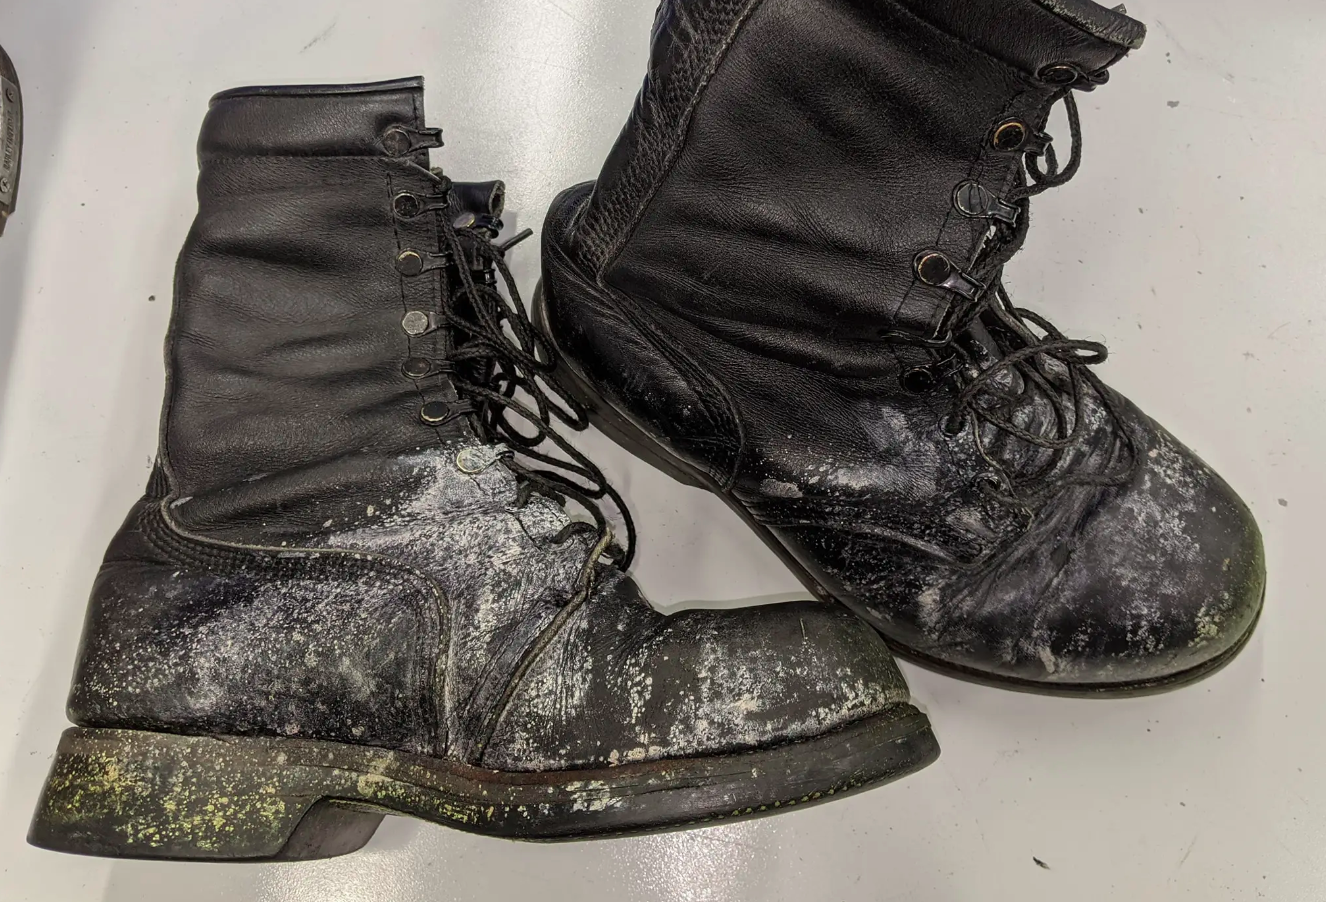 How to Remove Oil-Based Paint Stains from Leather Shoes